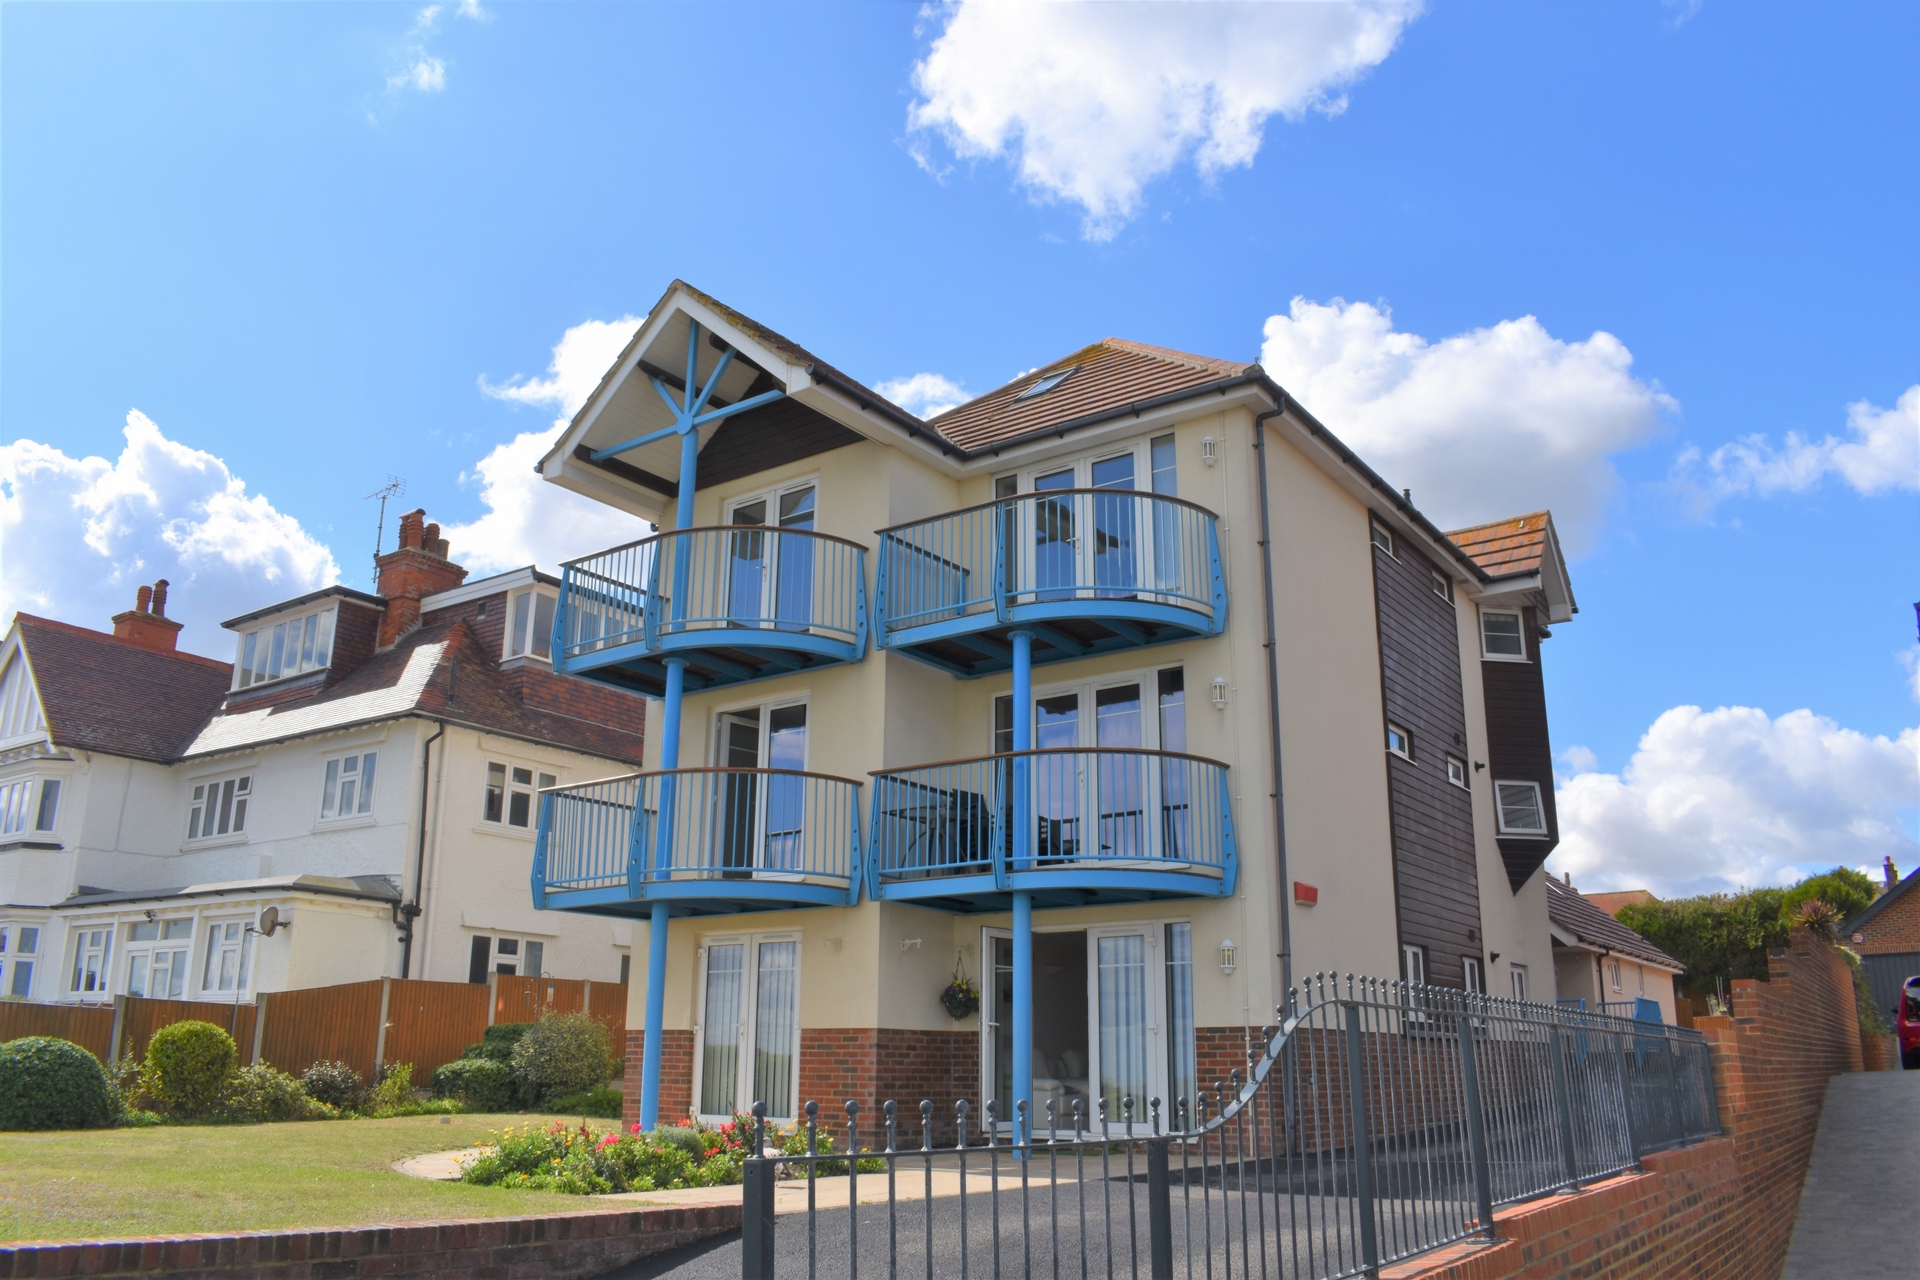 2 bed flat to rent in Western Esplanade, Broadstairs - Property Image 1